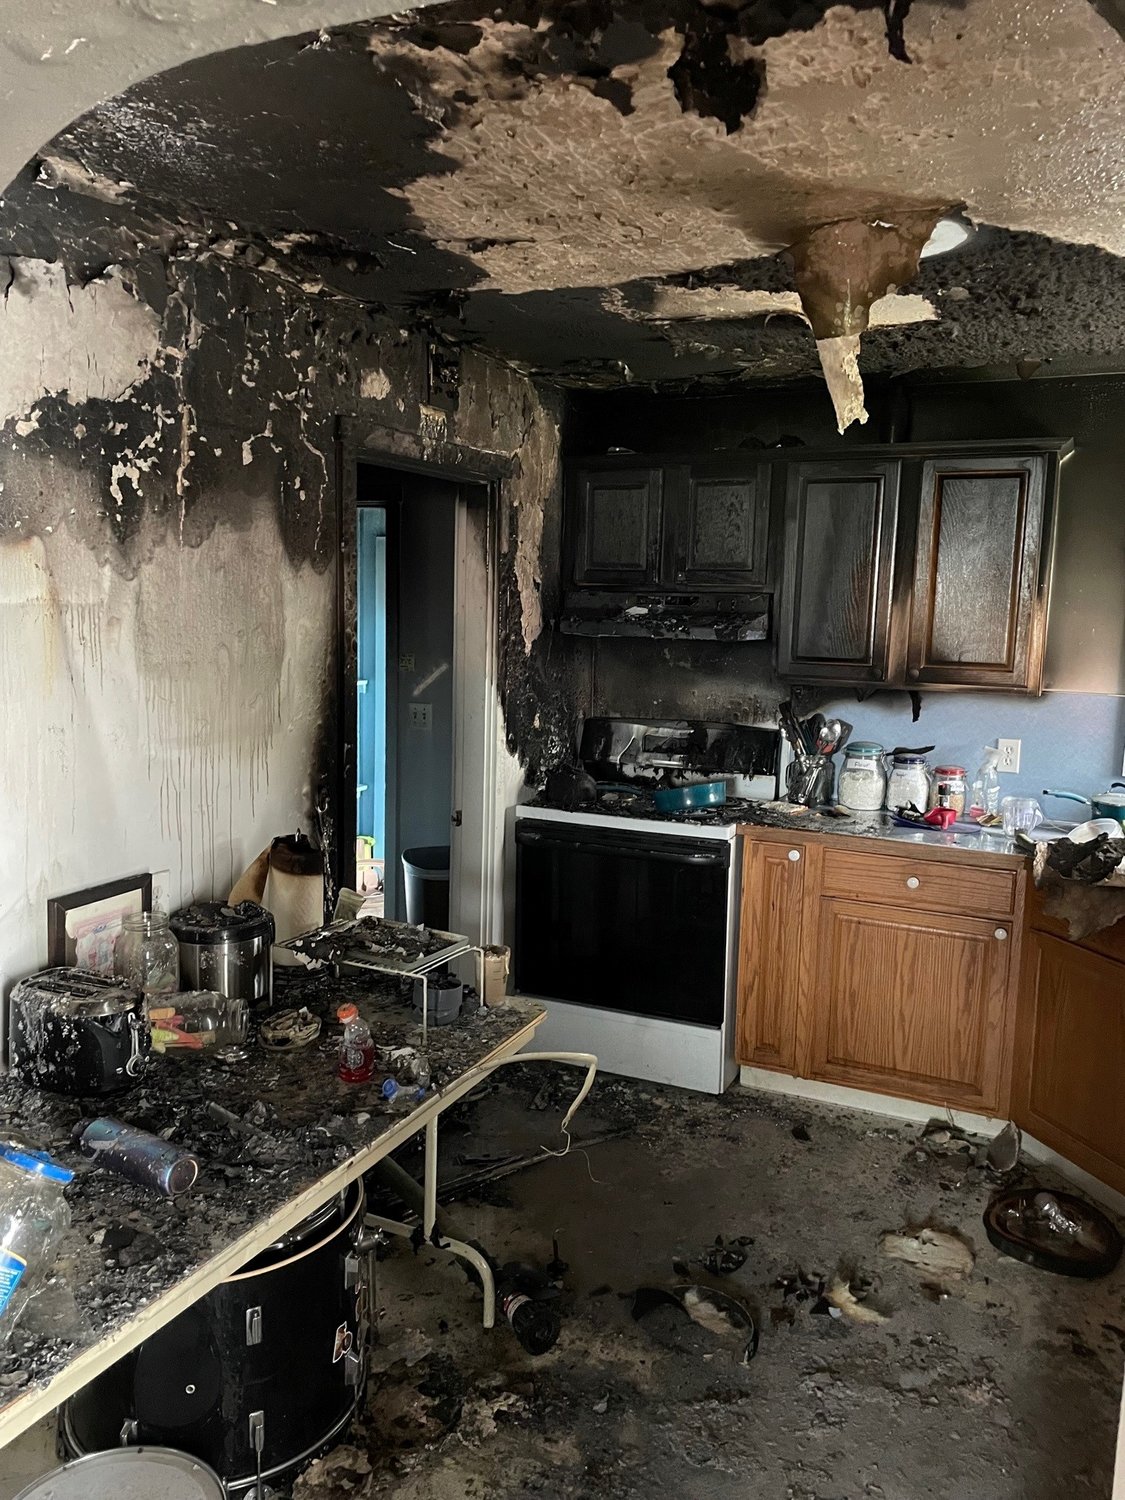 A kitchen fire at a Woodland home reportedly started as one of the occupants cooked fried chicken.